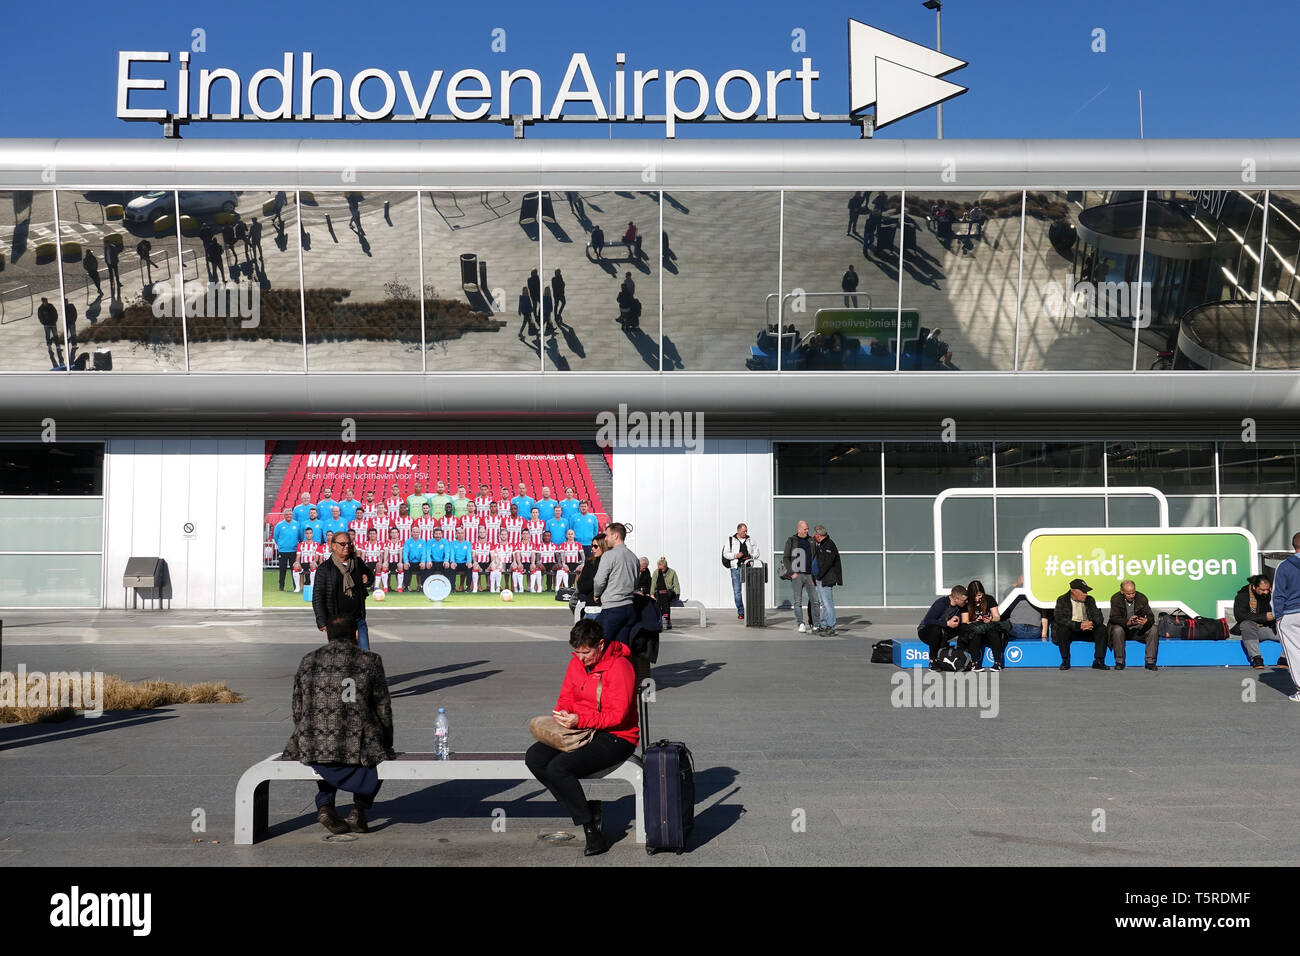 Eindhoven Airport, The Netherlands Stock Photo